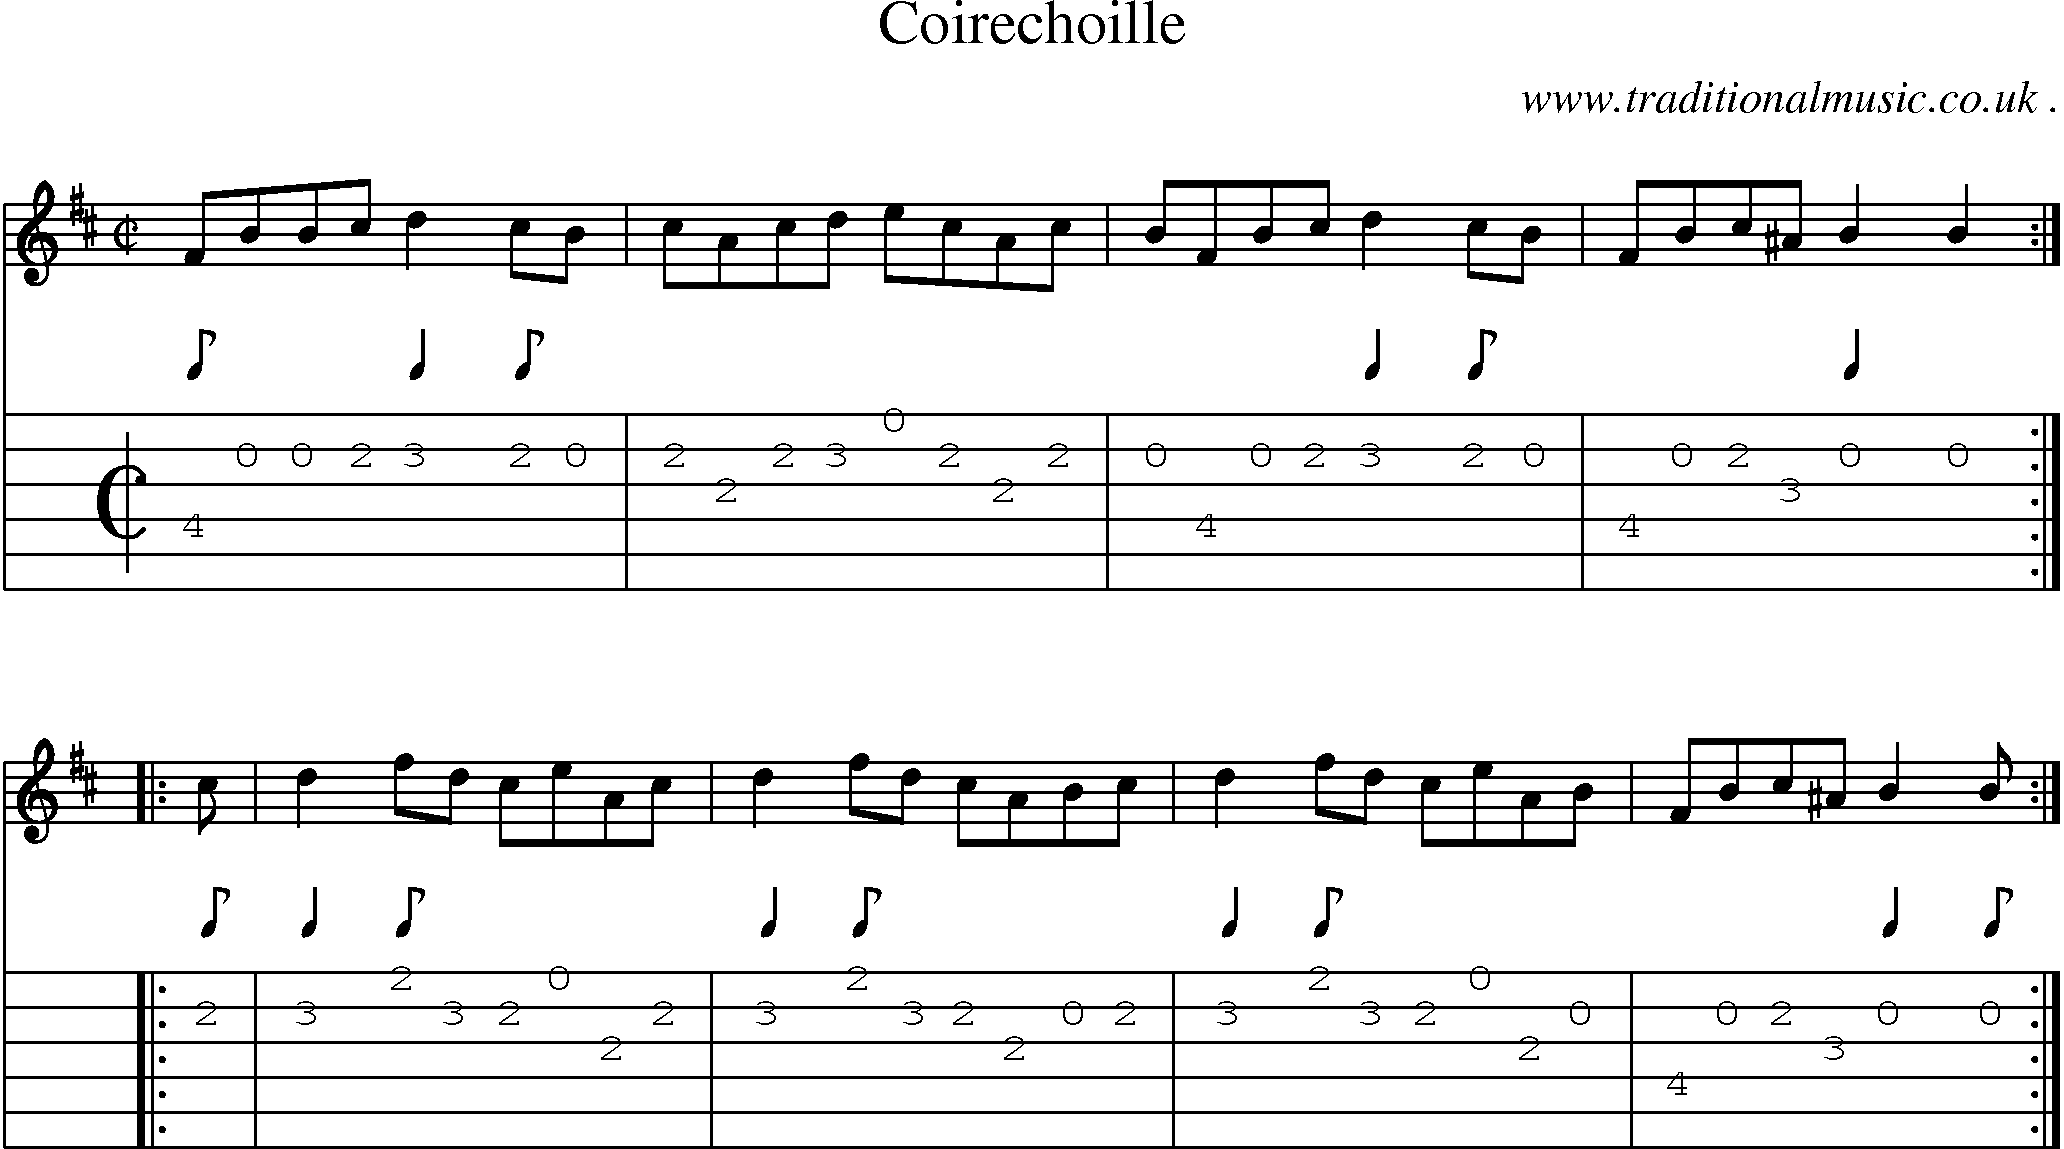 Sheet-music  score, Chords and Guitar Tabs for Coirechoille